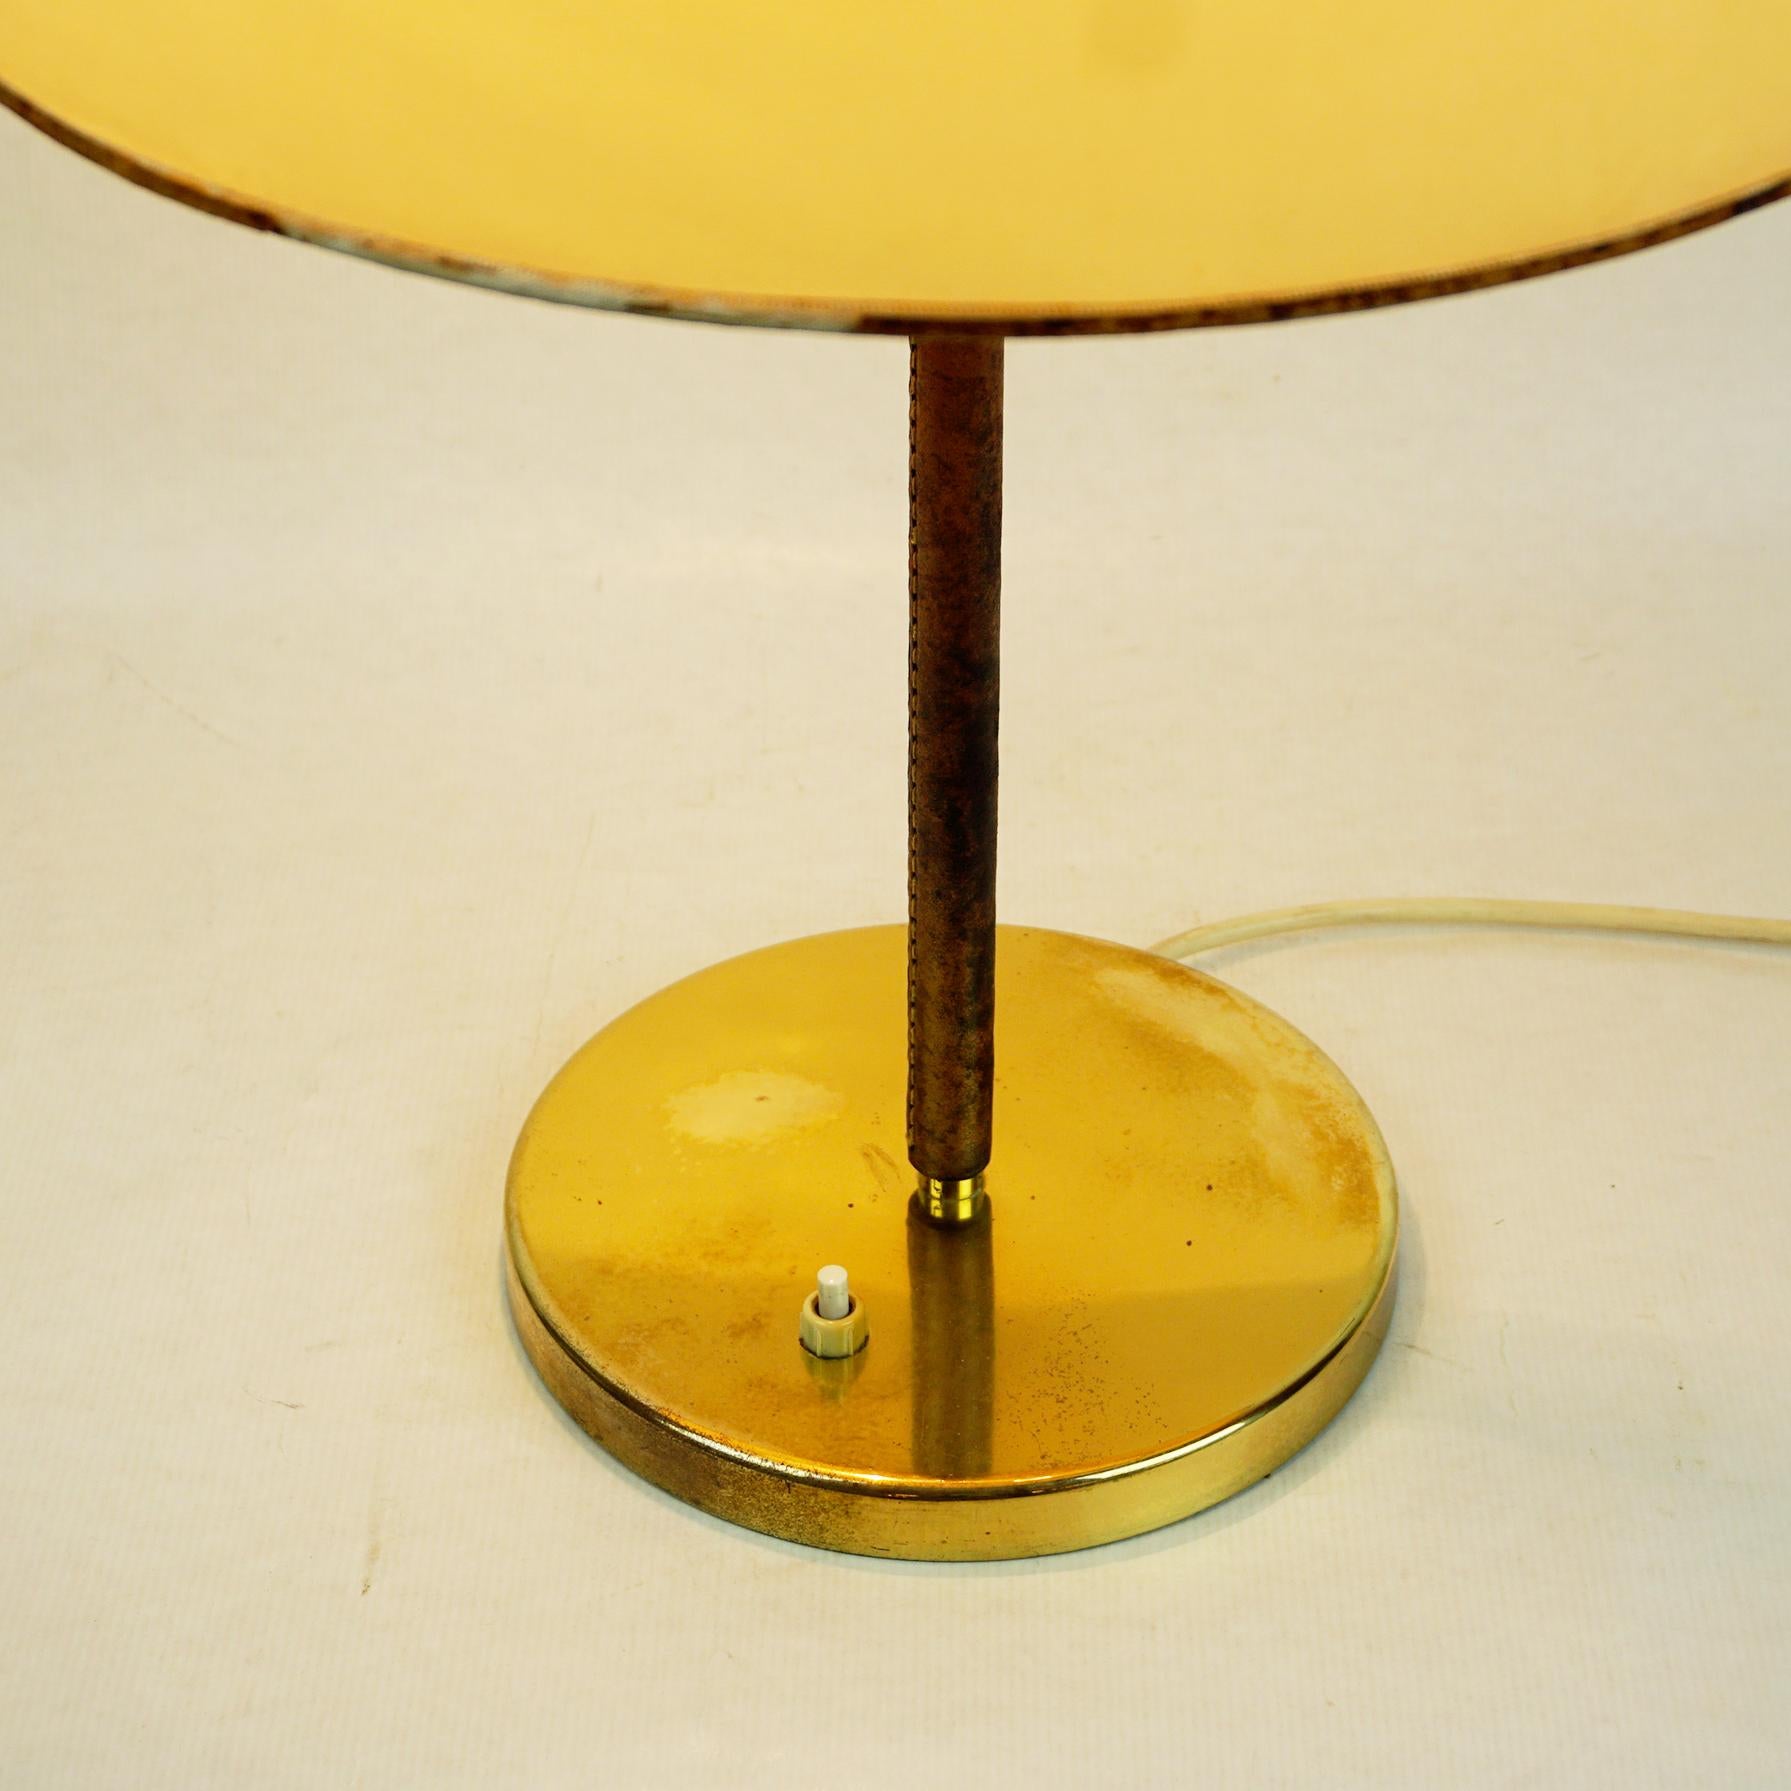 Austrian Midcentury Brass and Leather Table Lamp Mod. 1268 Essen by J. T. Kalmar For Sale 3